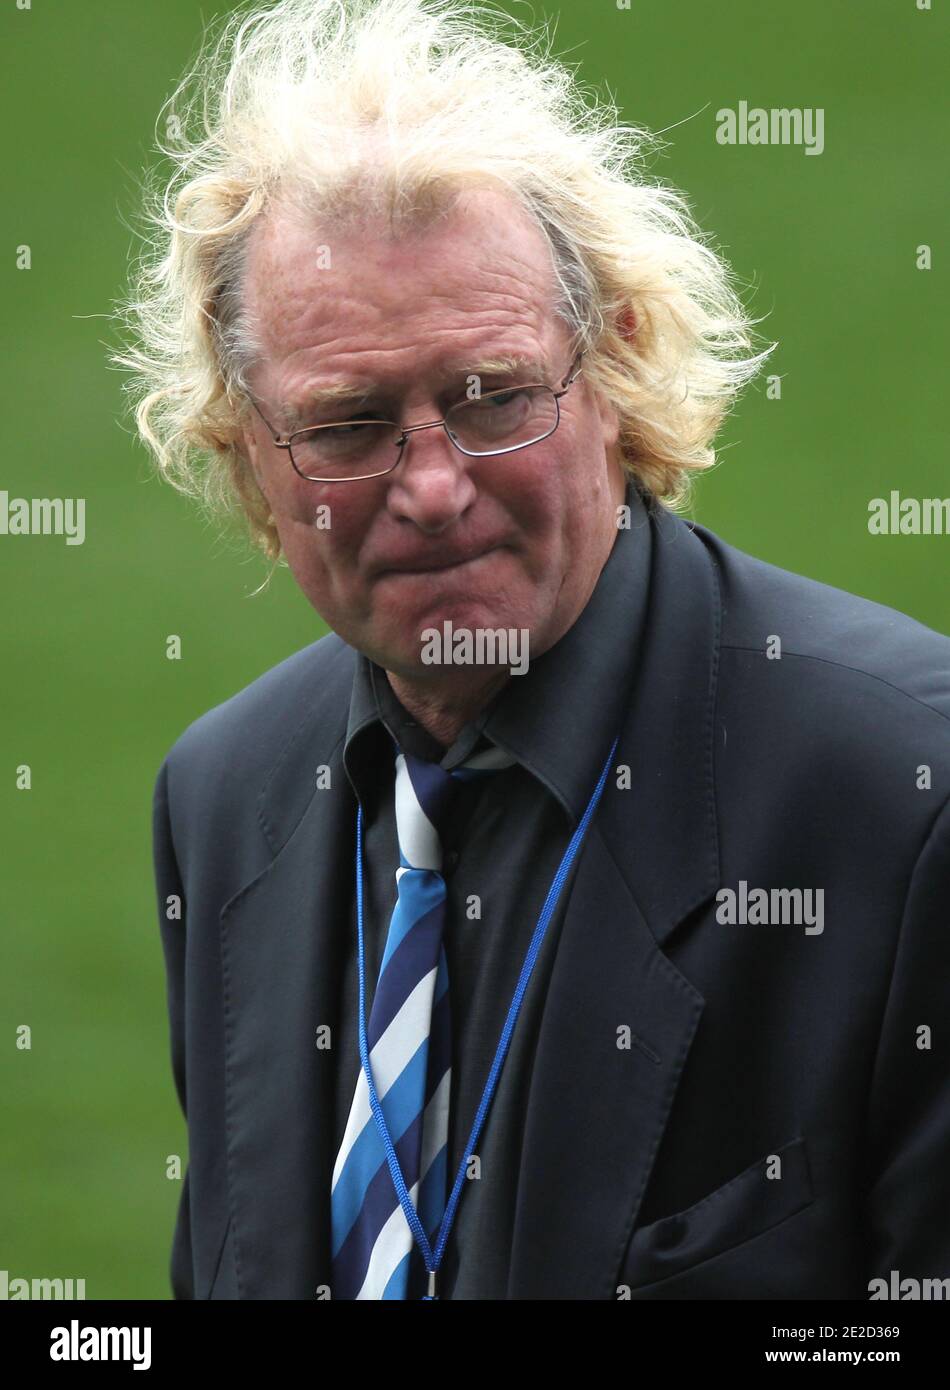 French rugby legend Jean-Pierre Rives leaving France captain's run at the  Eden Park in Auckland, New Zealand on October 22, 2011. Photo by Lionel  Hahn/ABACAPRESS.COM Stock Photo - Alamy